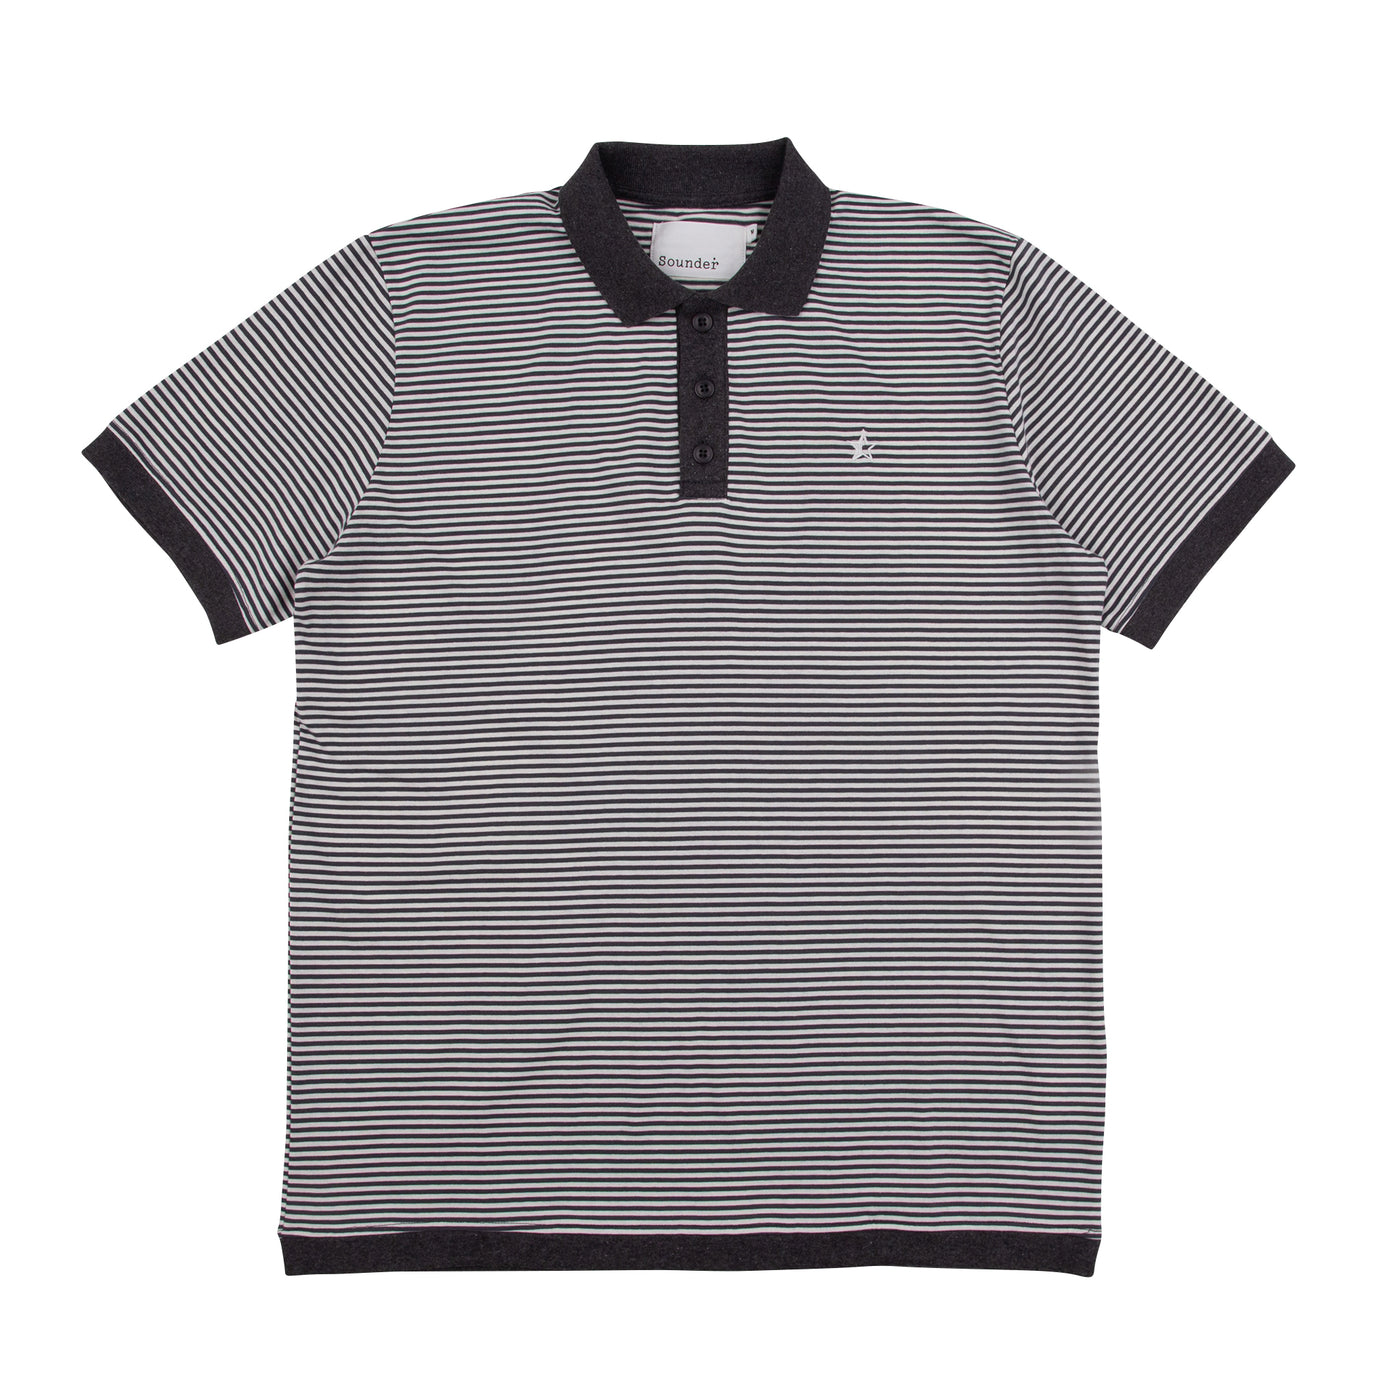 Play Well Polo - Charcoal and Off White Stripe